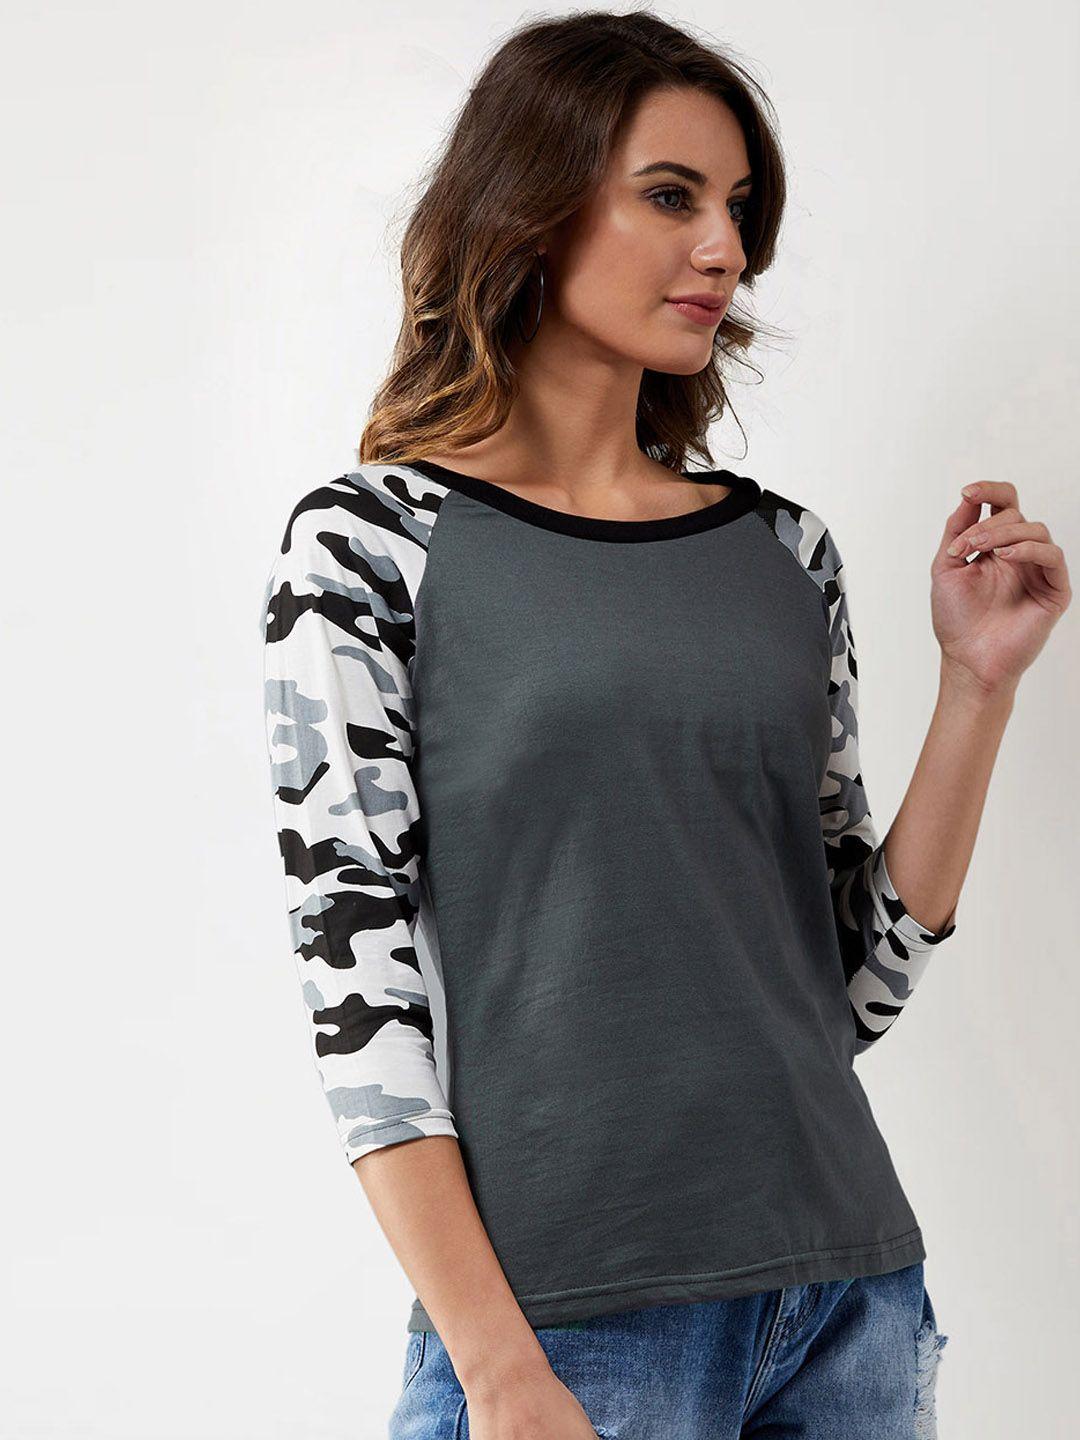 miss chase women grey & white camouflage printed round neck t-shirt